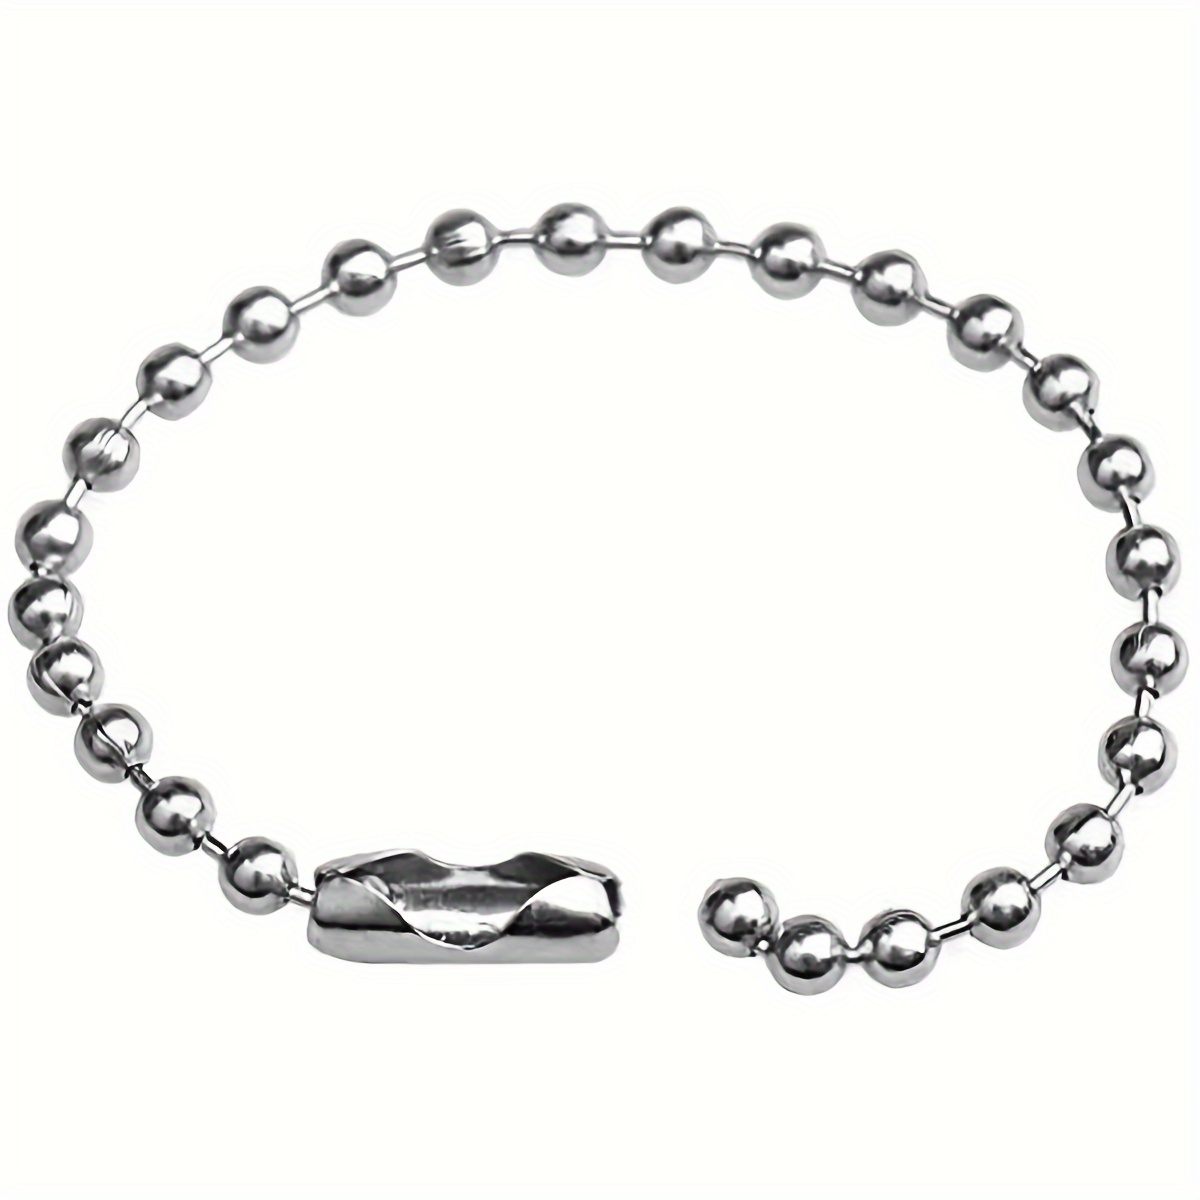 

30/50/100/200pcs 10cm/4inch Stainless Steel Bead Chain With Ball Connector Clasp Keychain Rings Metal Bead Chain Nickel Chain Dog Tag Chain Diy Jewelry Making Supplies (silver)